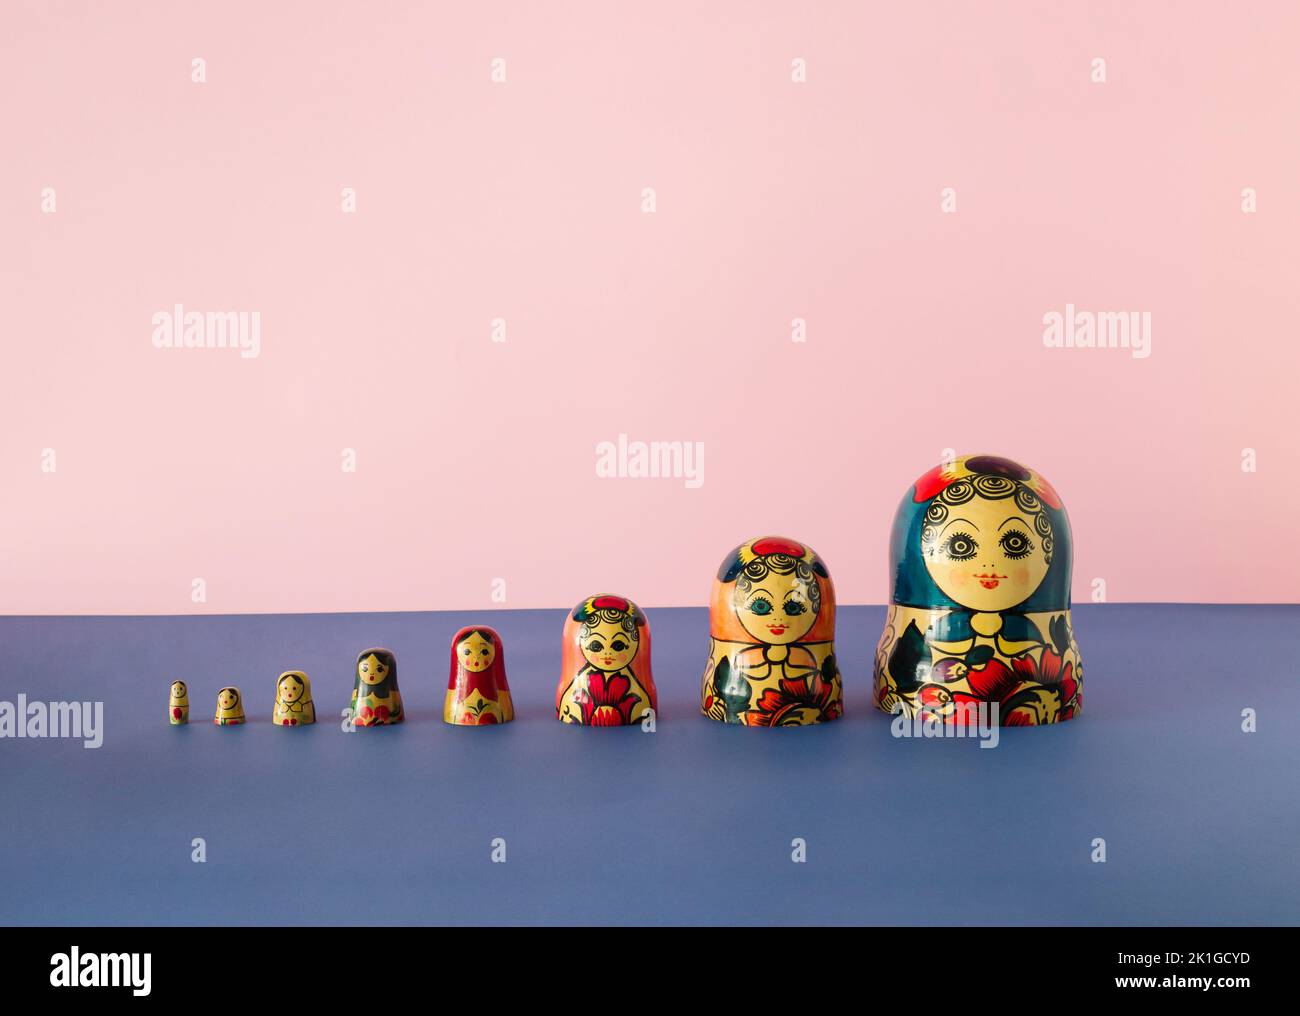 Russian dolls also known as matryoshka or babushka stacked on a pink and blue background. Minimal concept. Stock Photo